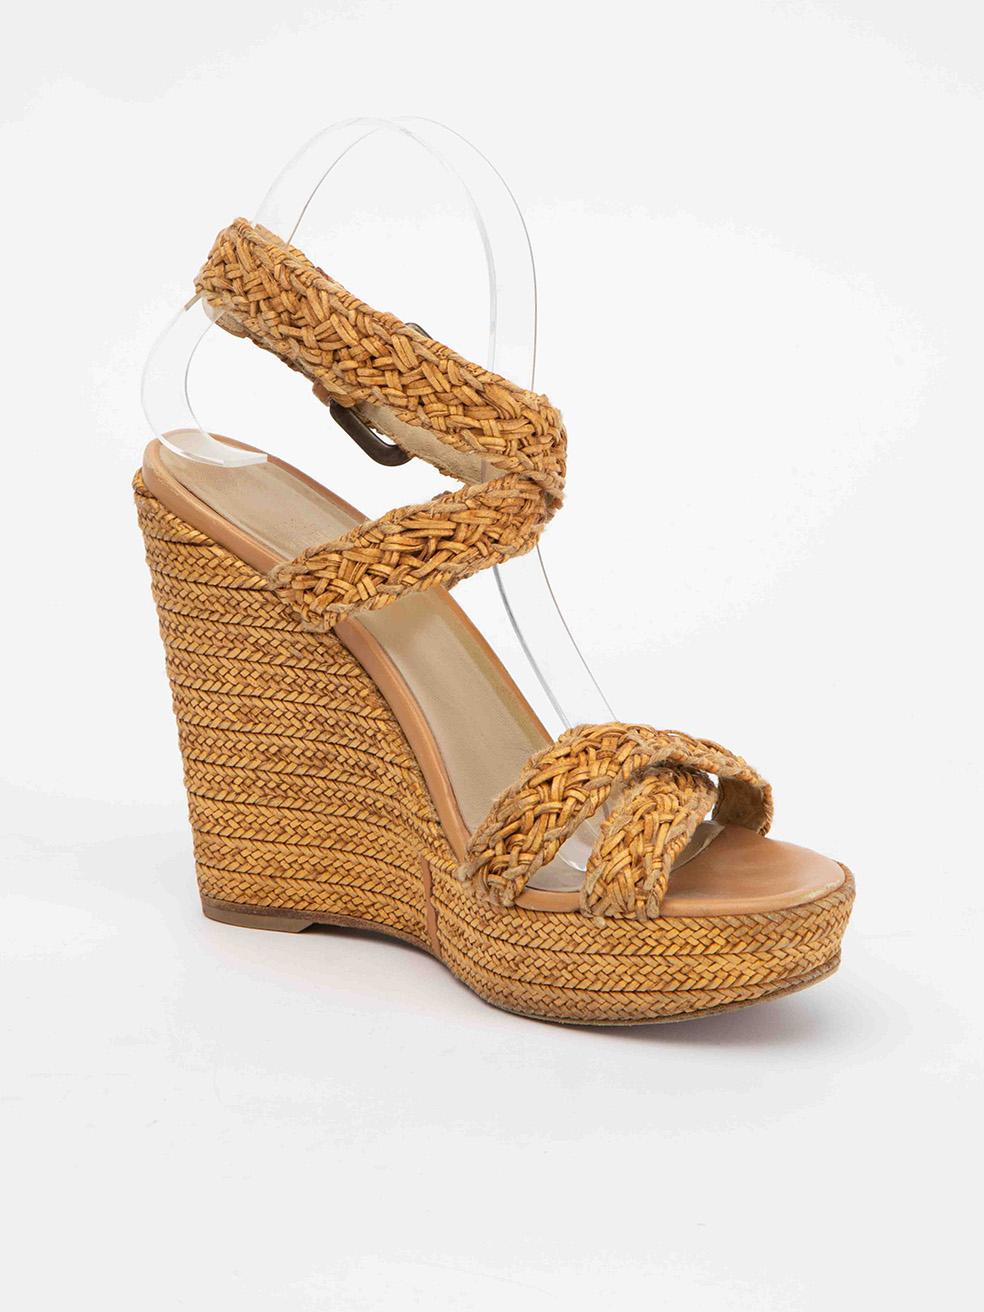 CONDITION is Very good. Minimal wear to shoes is evident. Light wear to heels and insoles as well as pulling to suede lining of straps on this used Stuart Weitzman designer resale item. 
 
 Details
  Brown
 Cloth textile
 Weaved sandals
 Open toe
